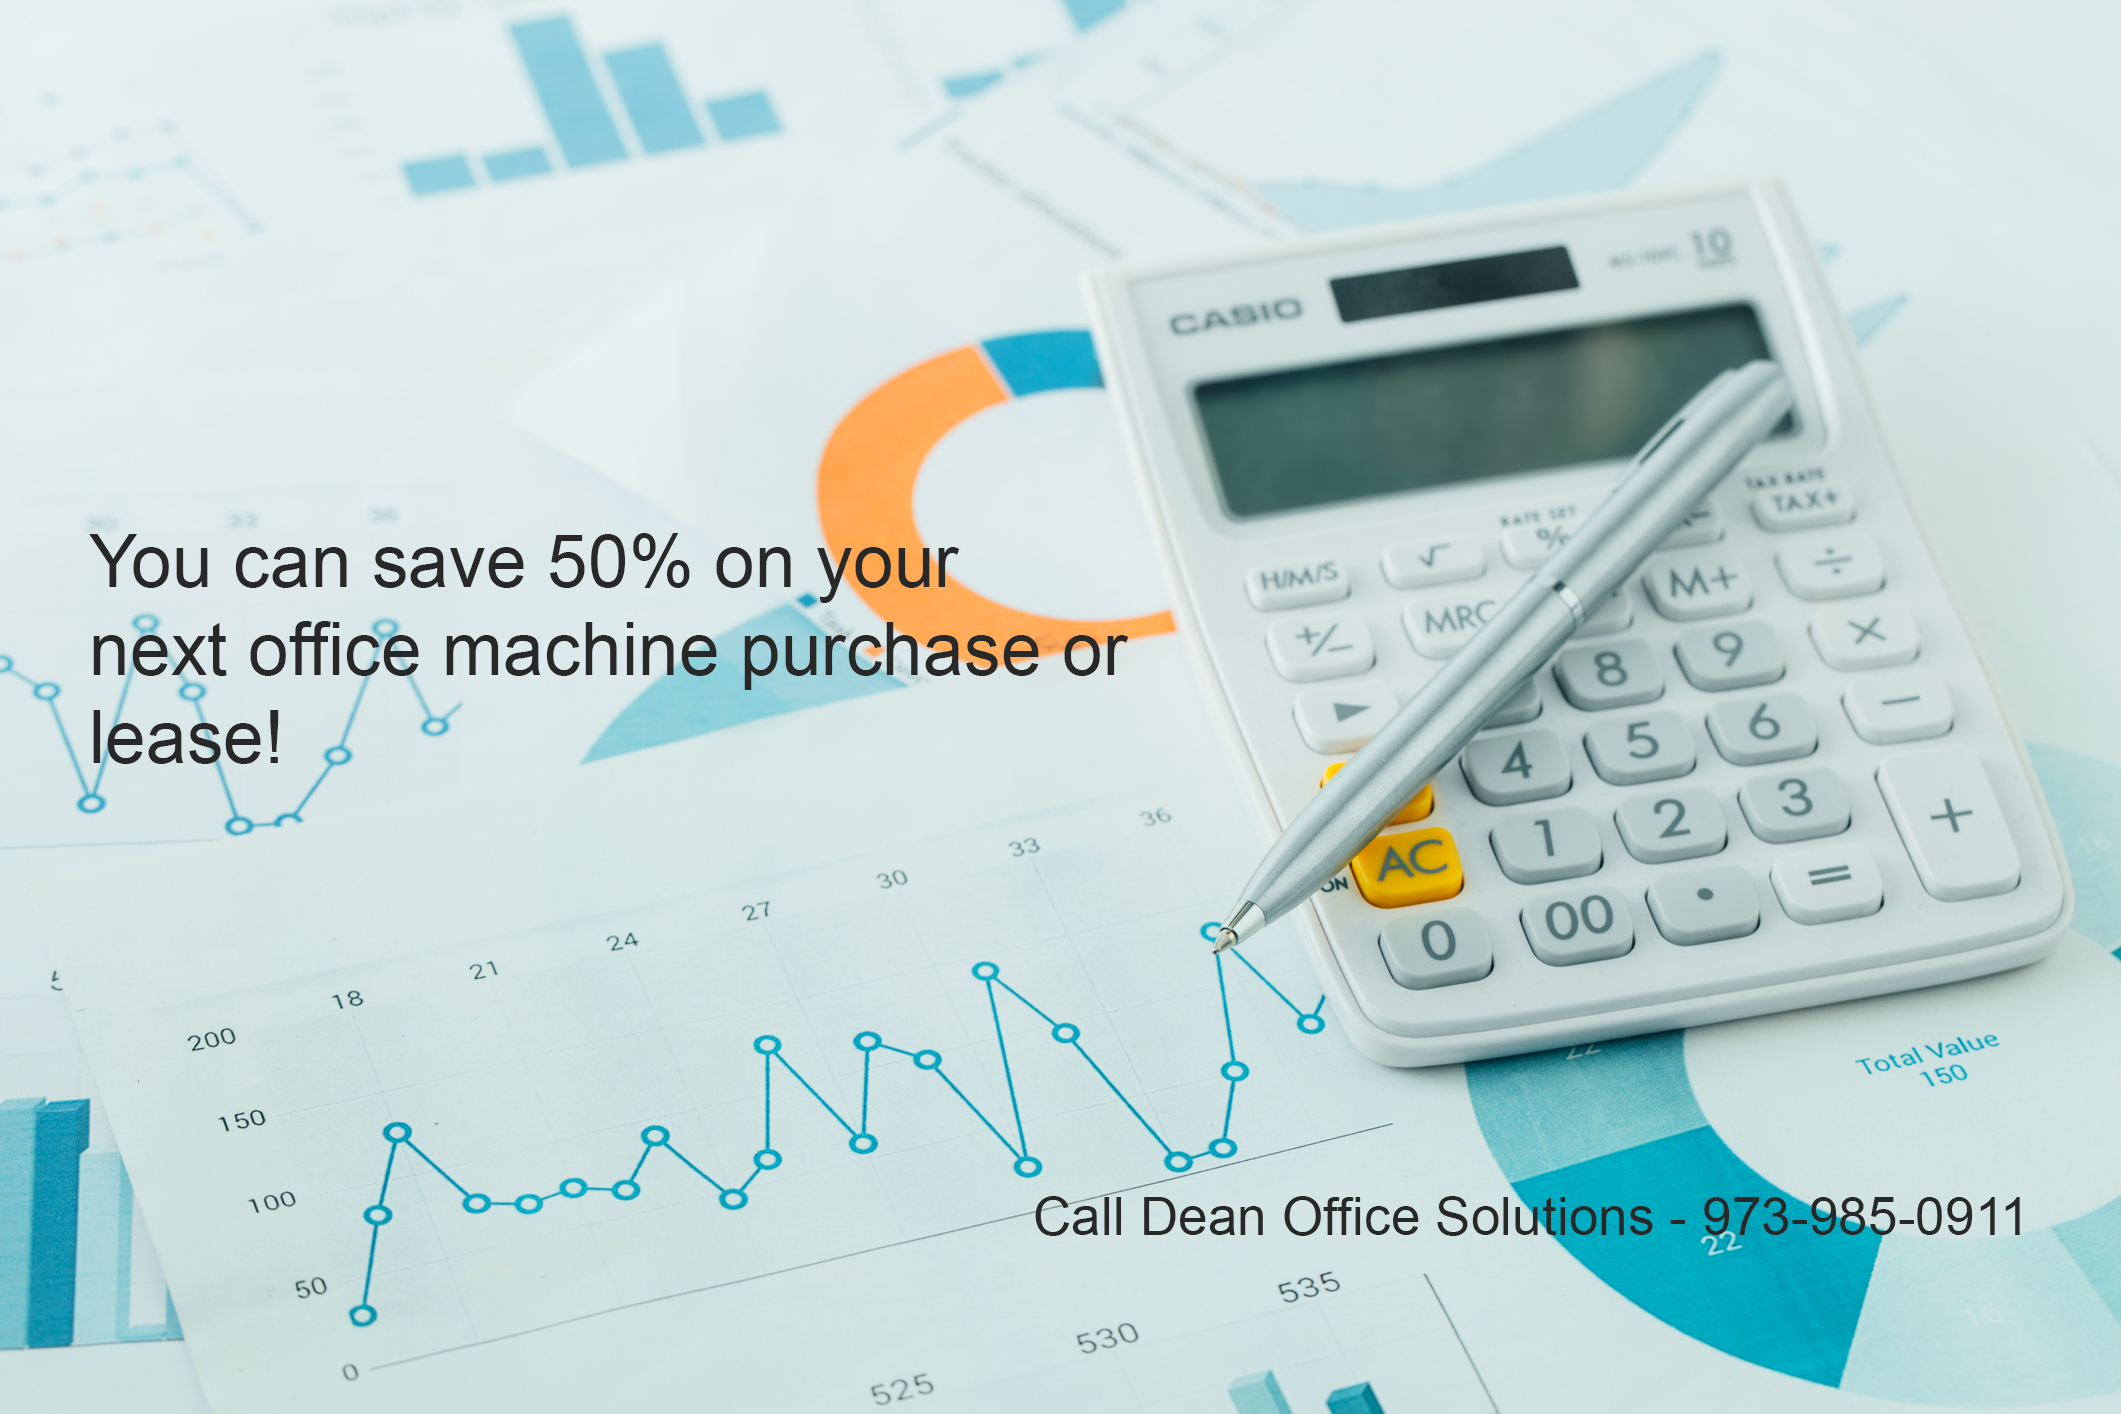 Save 50% on your next office machine purchase or lease